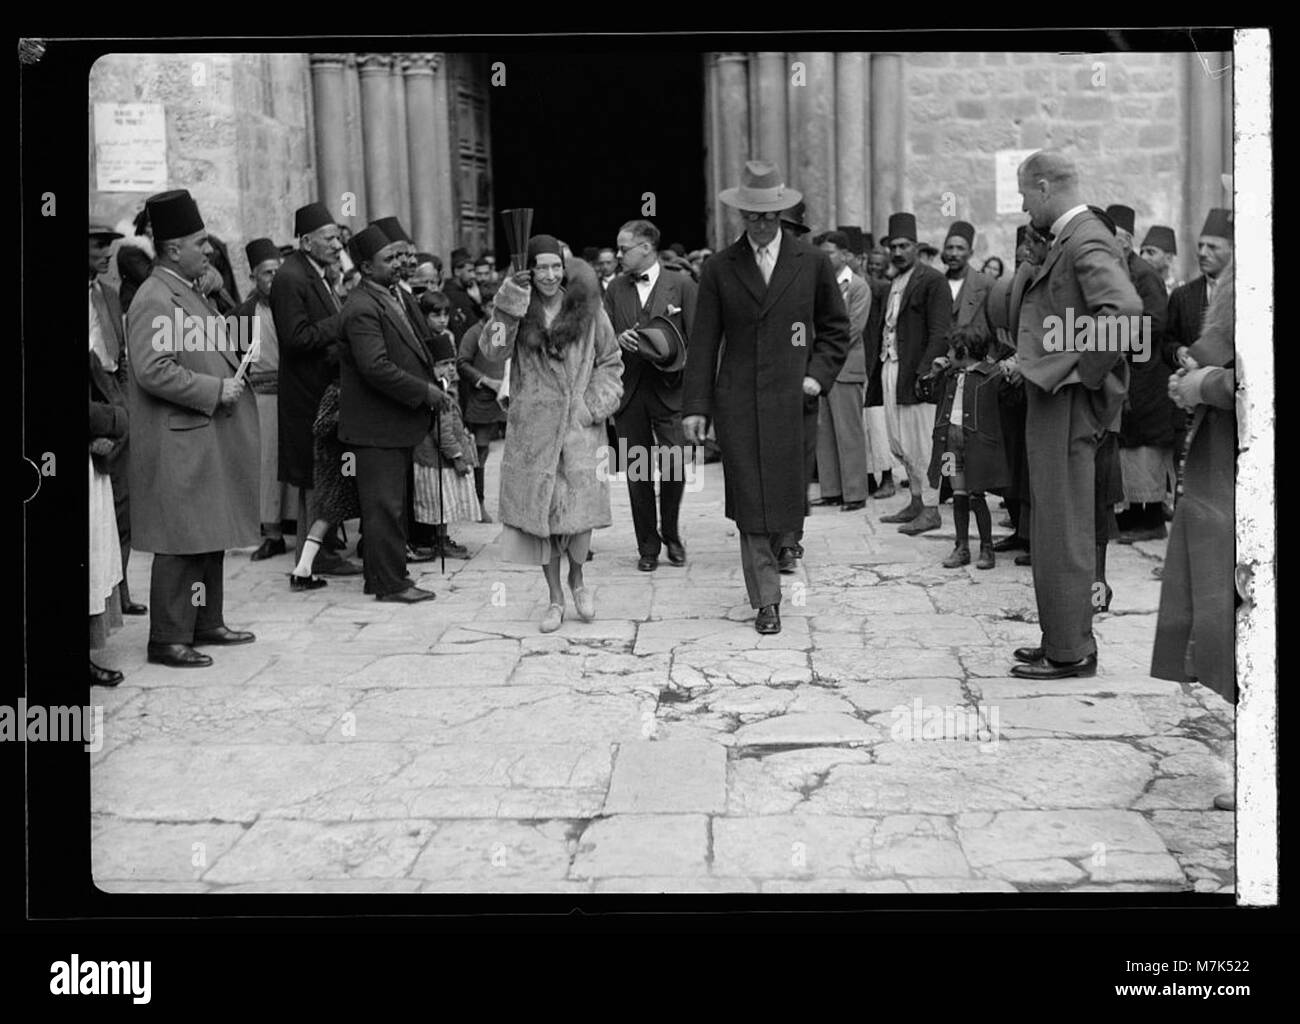 Centennial Easter celebrations. Holy Year. Their Majesties. The Late King Albert and Queen Elizabeth of Belgium. Coming out of the Church of the Holy Sepulchre. April 6, 1933 LOC matpc.15768 Stock Photo